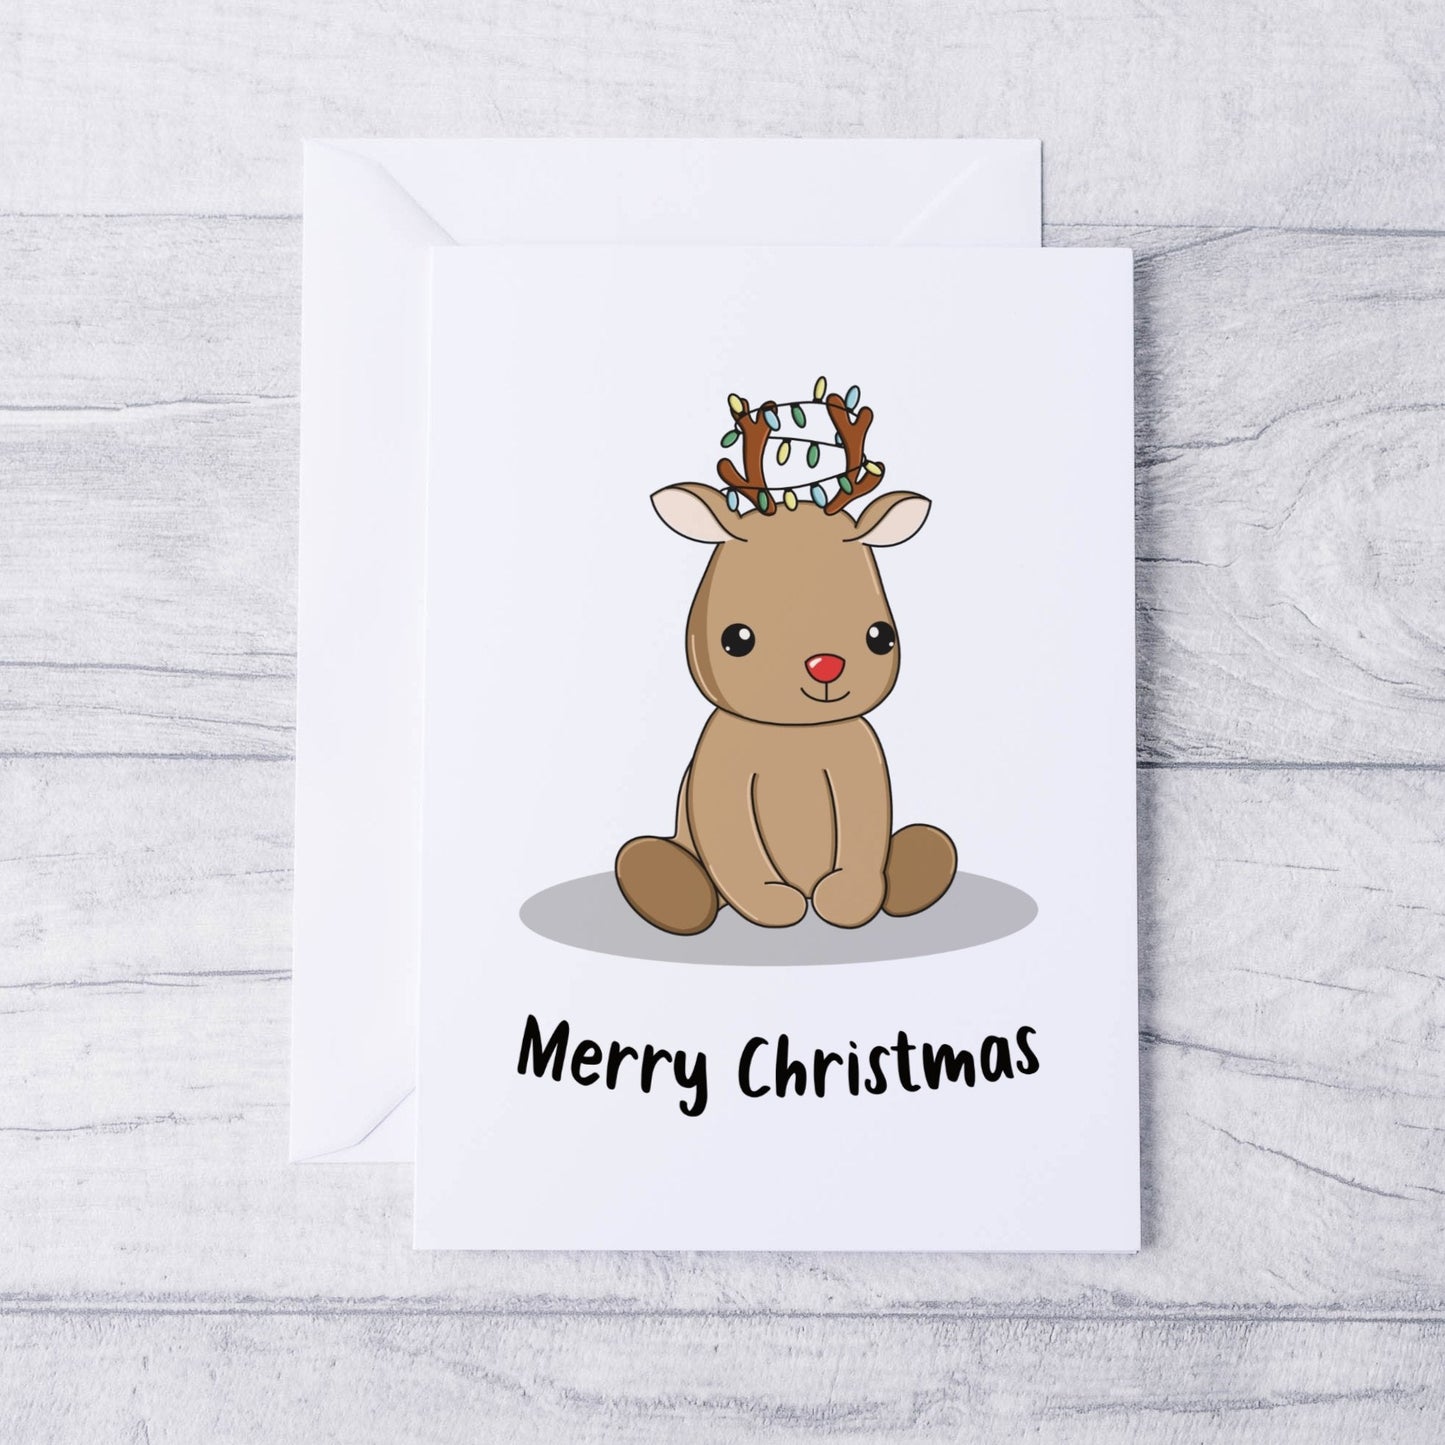 Pack of 5 Reindeer Christmas Cards - Dolly and Fred Designs